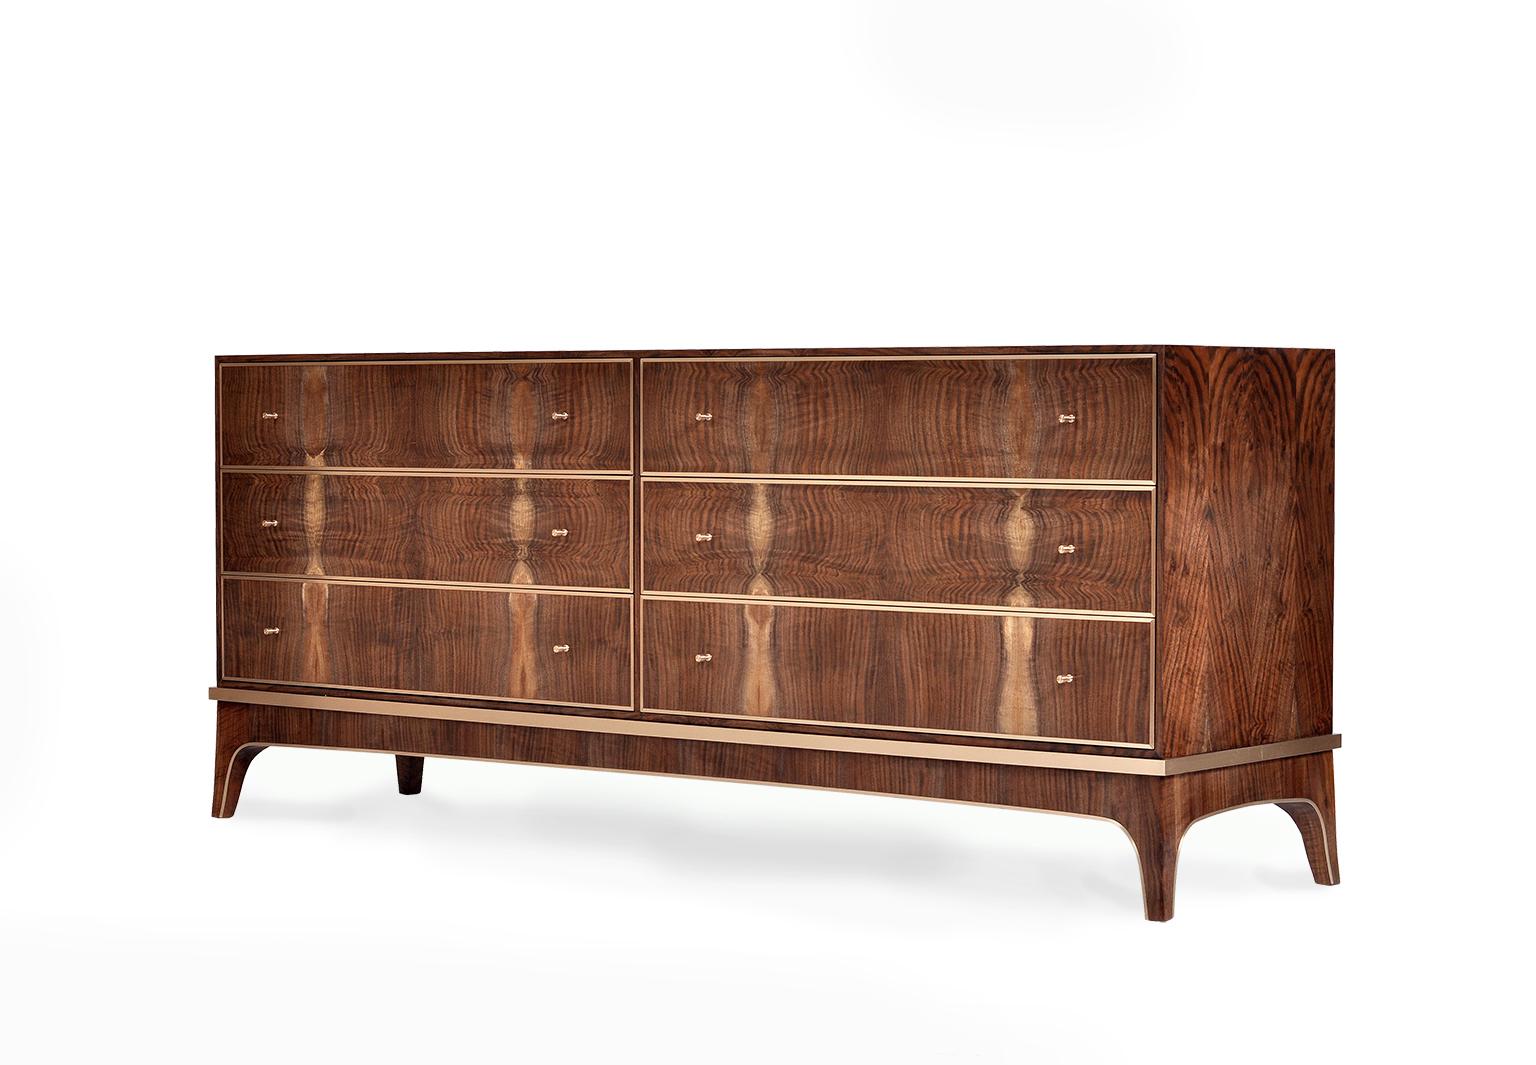 The French Modernist Reve Dresser in Bastogne Walnut. Reve is built with a marvelous solid wood understructure assembled with traditional, strong mortise and tenon joinery.  Either lacquered with our ultra luxurious colors or veneered with beautiful